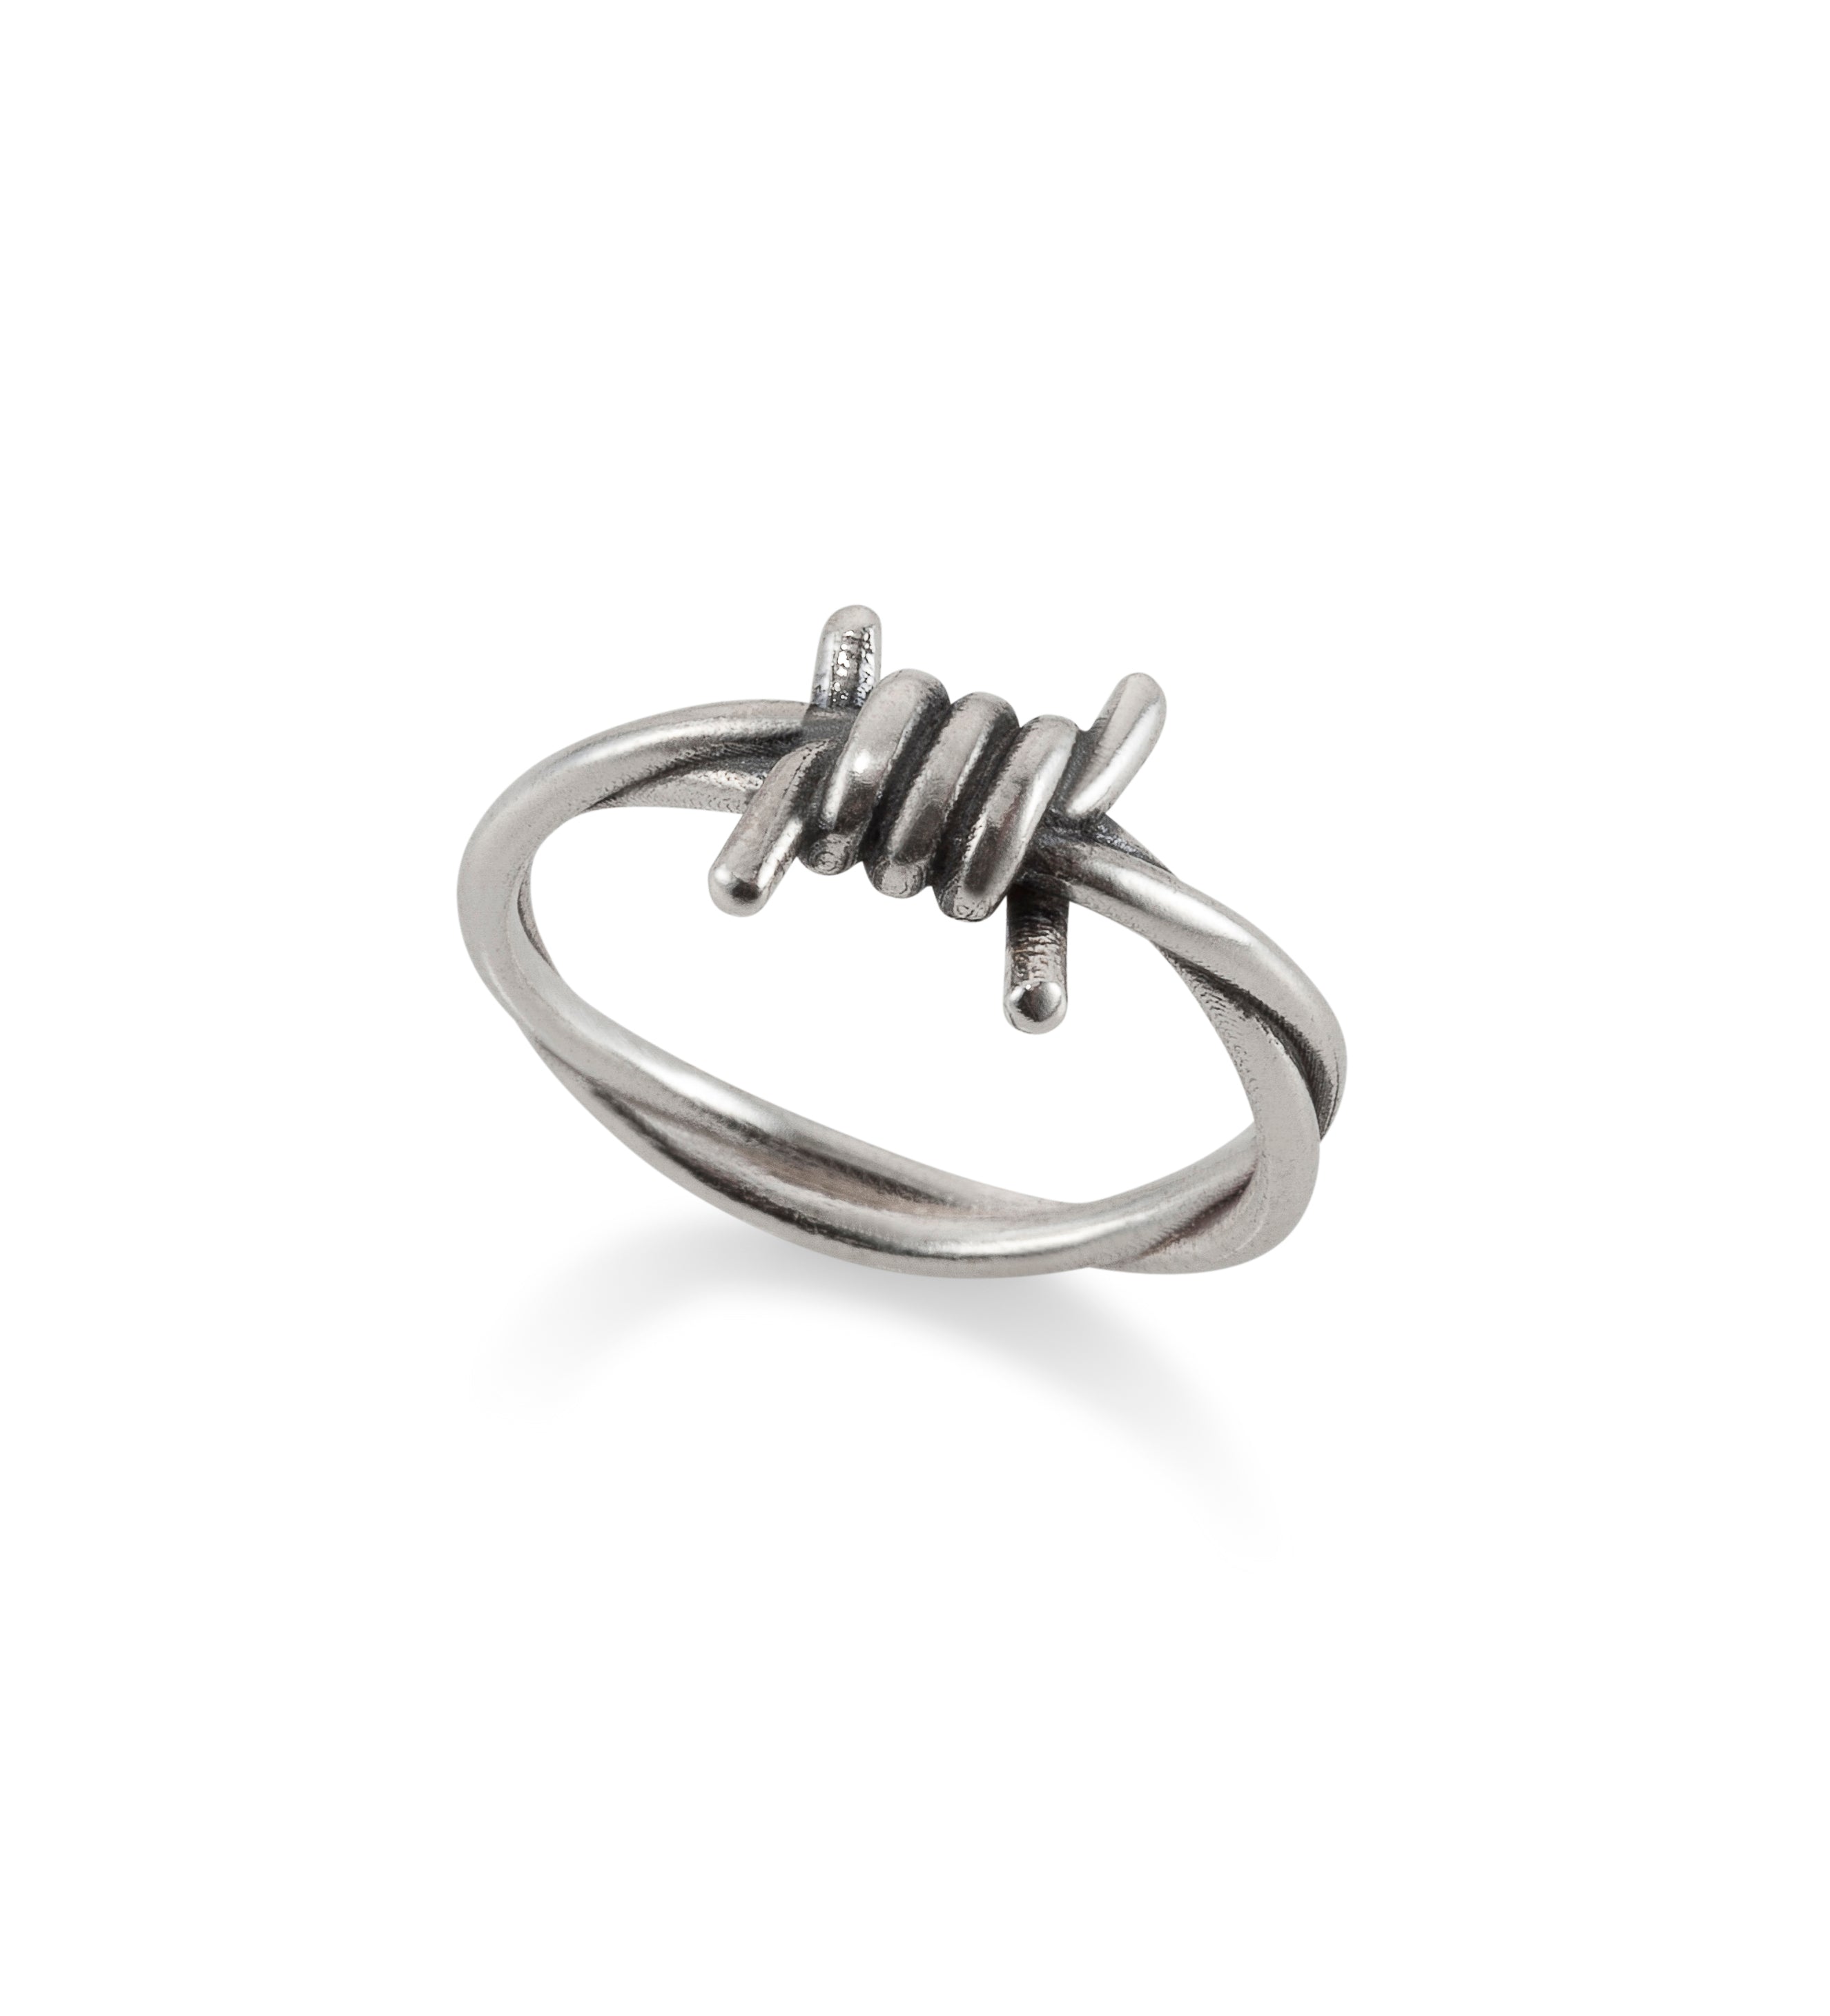 SILVER SMALL BARBED WIRE RING